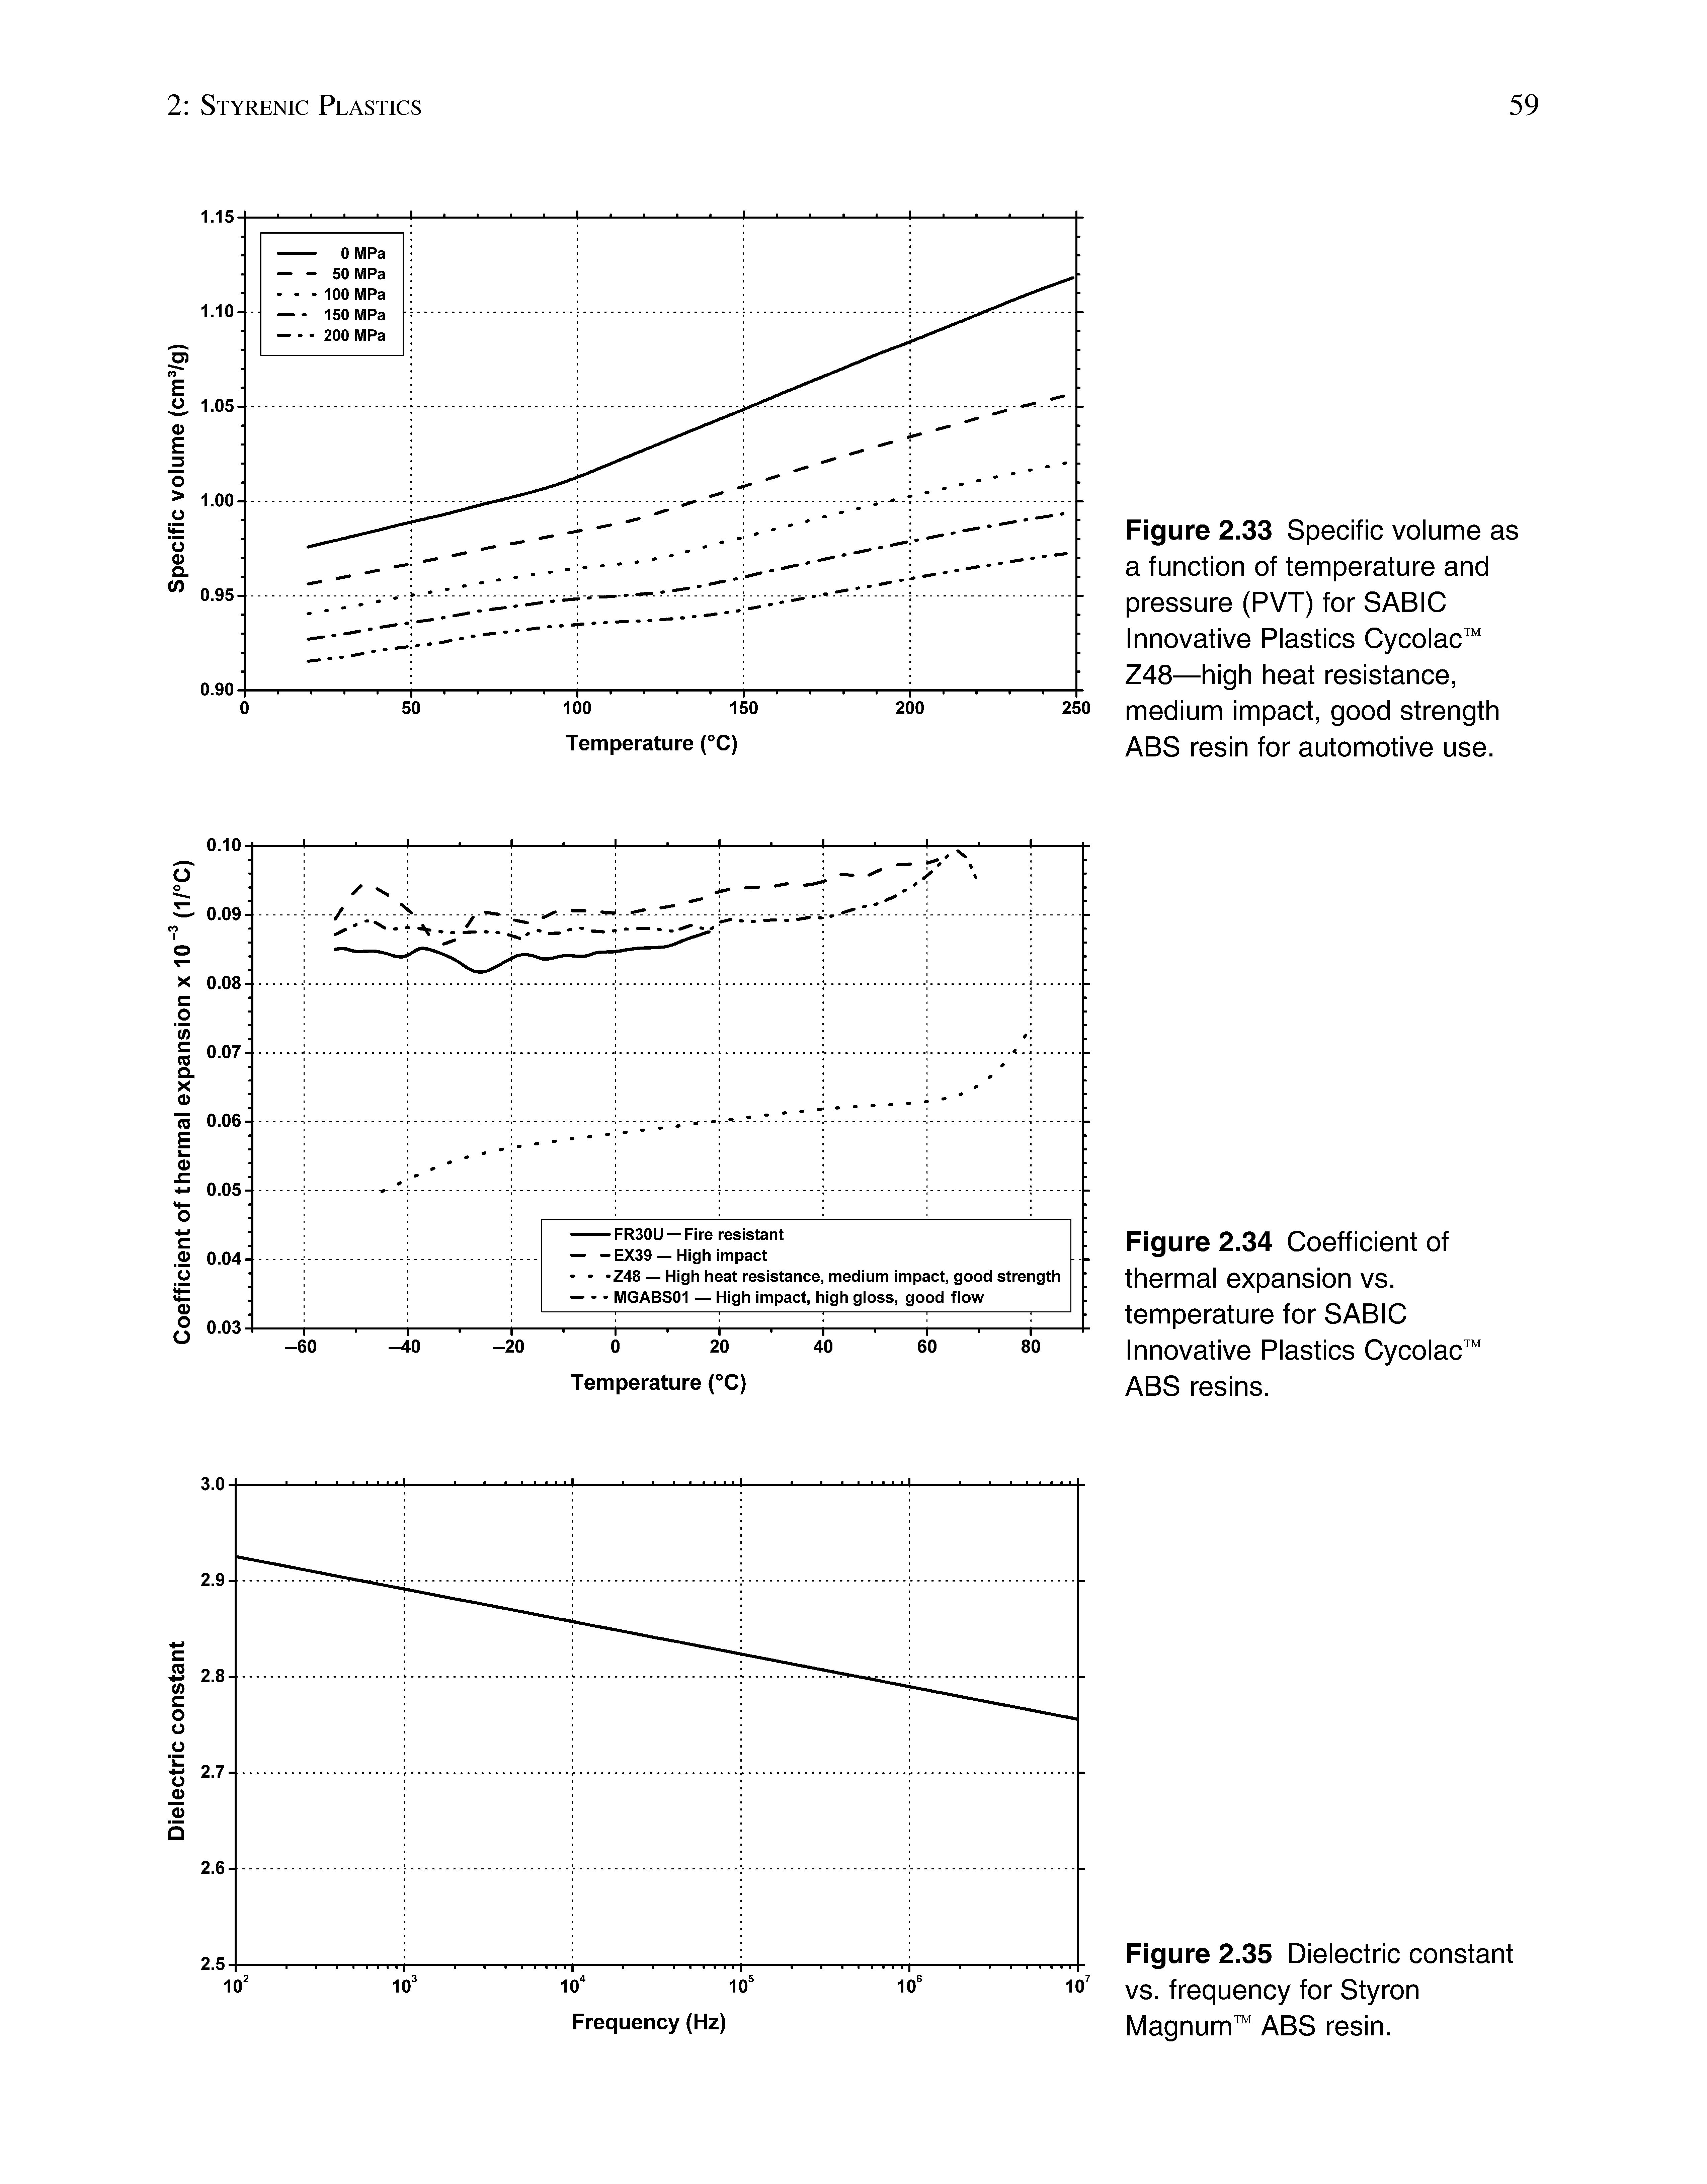 Figure 2.35 Dielectric constant vs. frequency for Styron Magnum ABS resin.